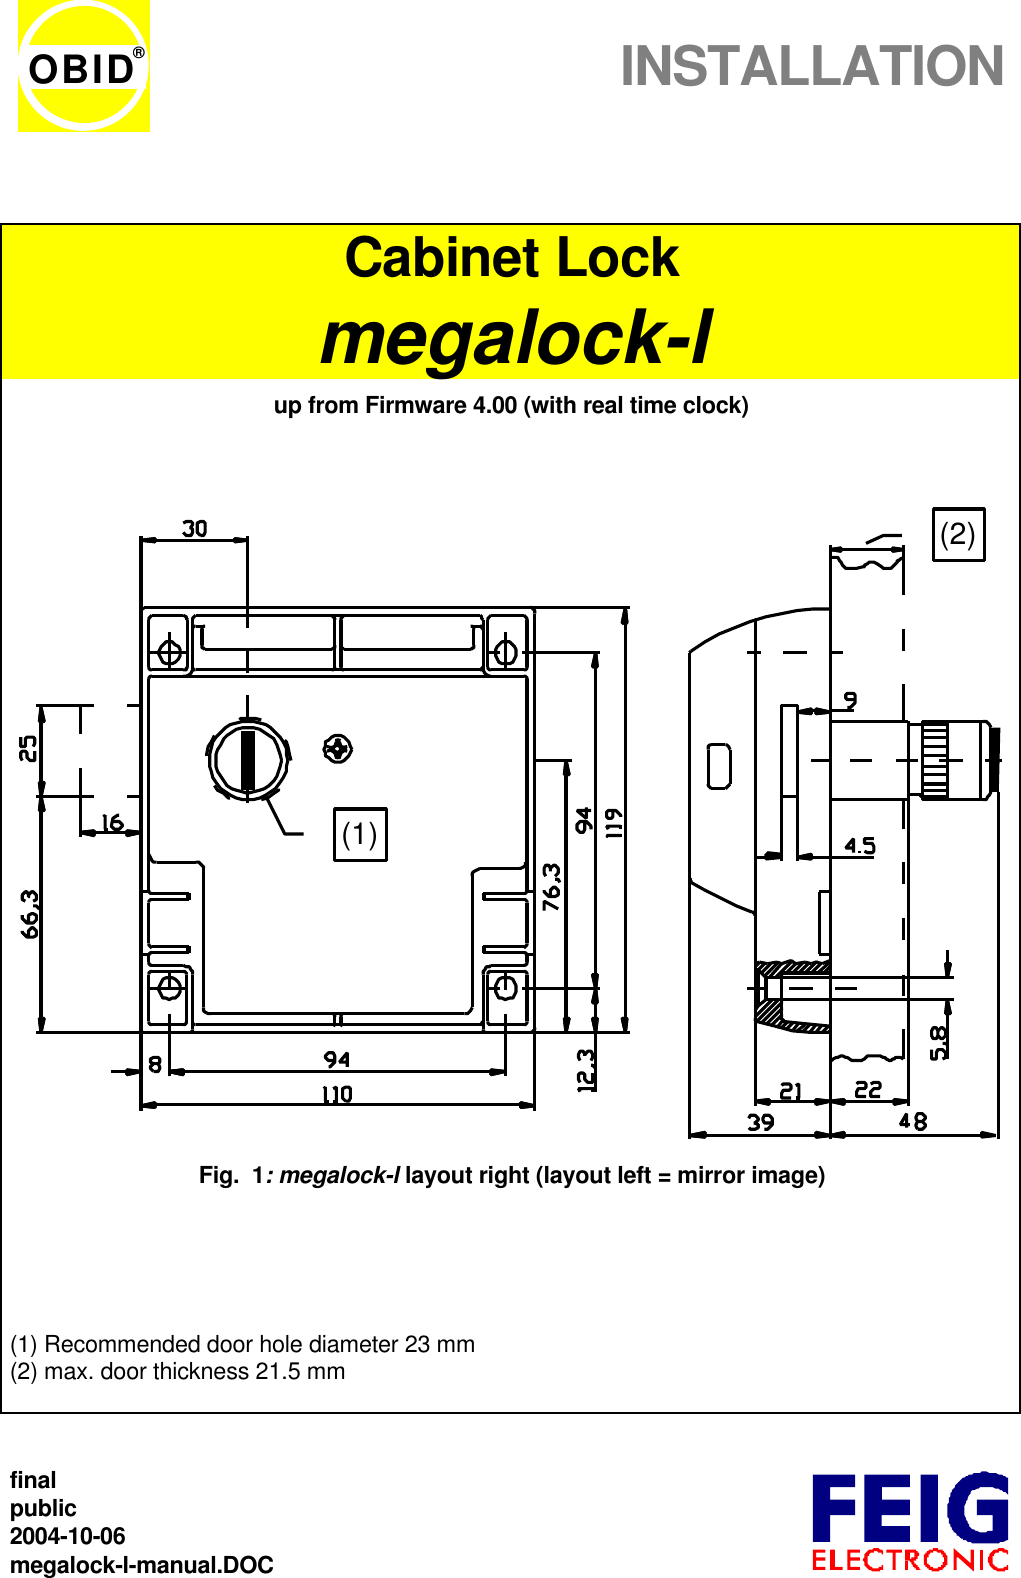 INSTALLATIONfinalpublic2004-10-06megalock-l-manual.DOCOBID®Cabinet Lockmegalock-lup from Firmware 4.00 (with real time clock)(1)(2)Fig.  1: megalock-l layout right (layout left = mirror image)(1) Recommended door hole diameter 23 mm(2) max. door thickness 21.5 mm